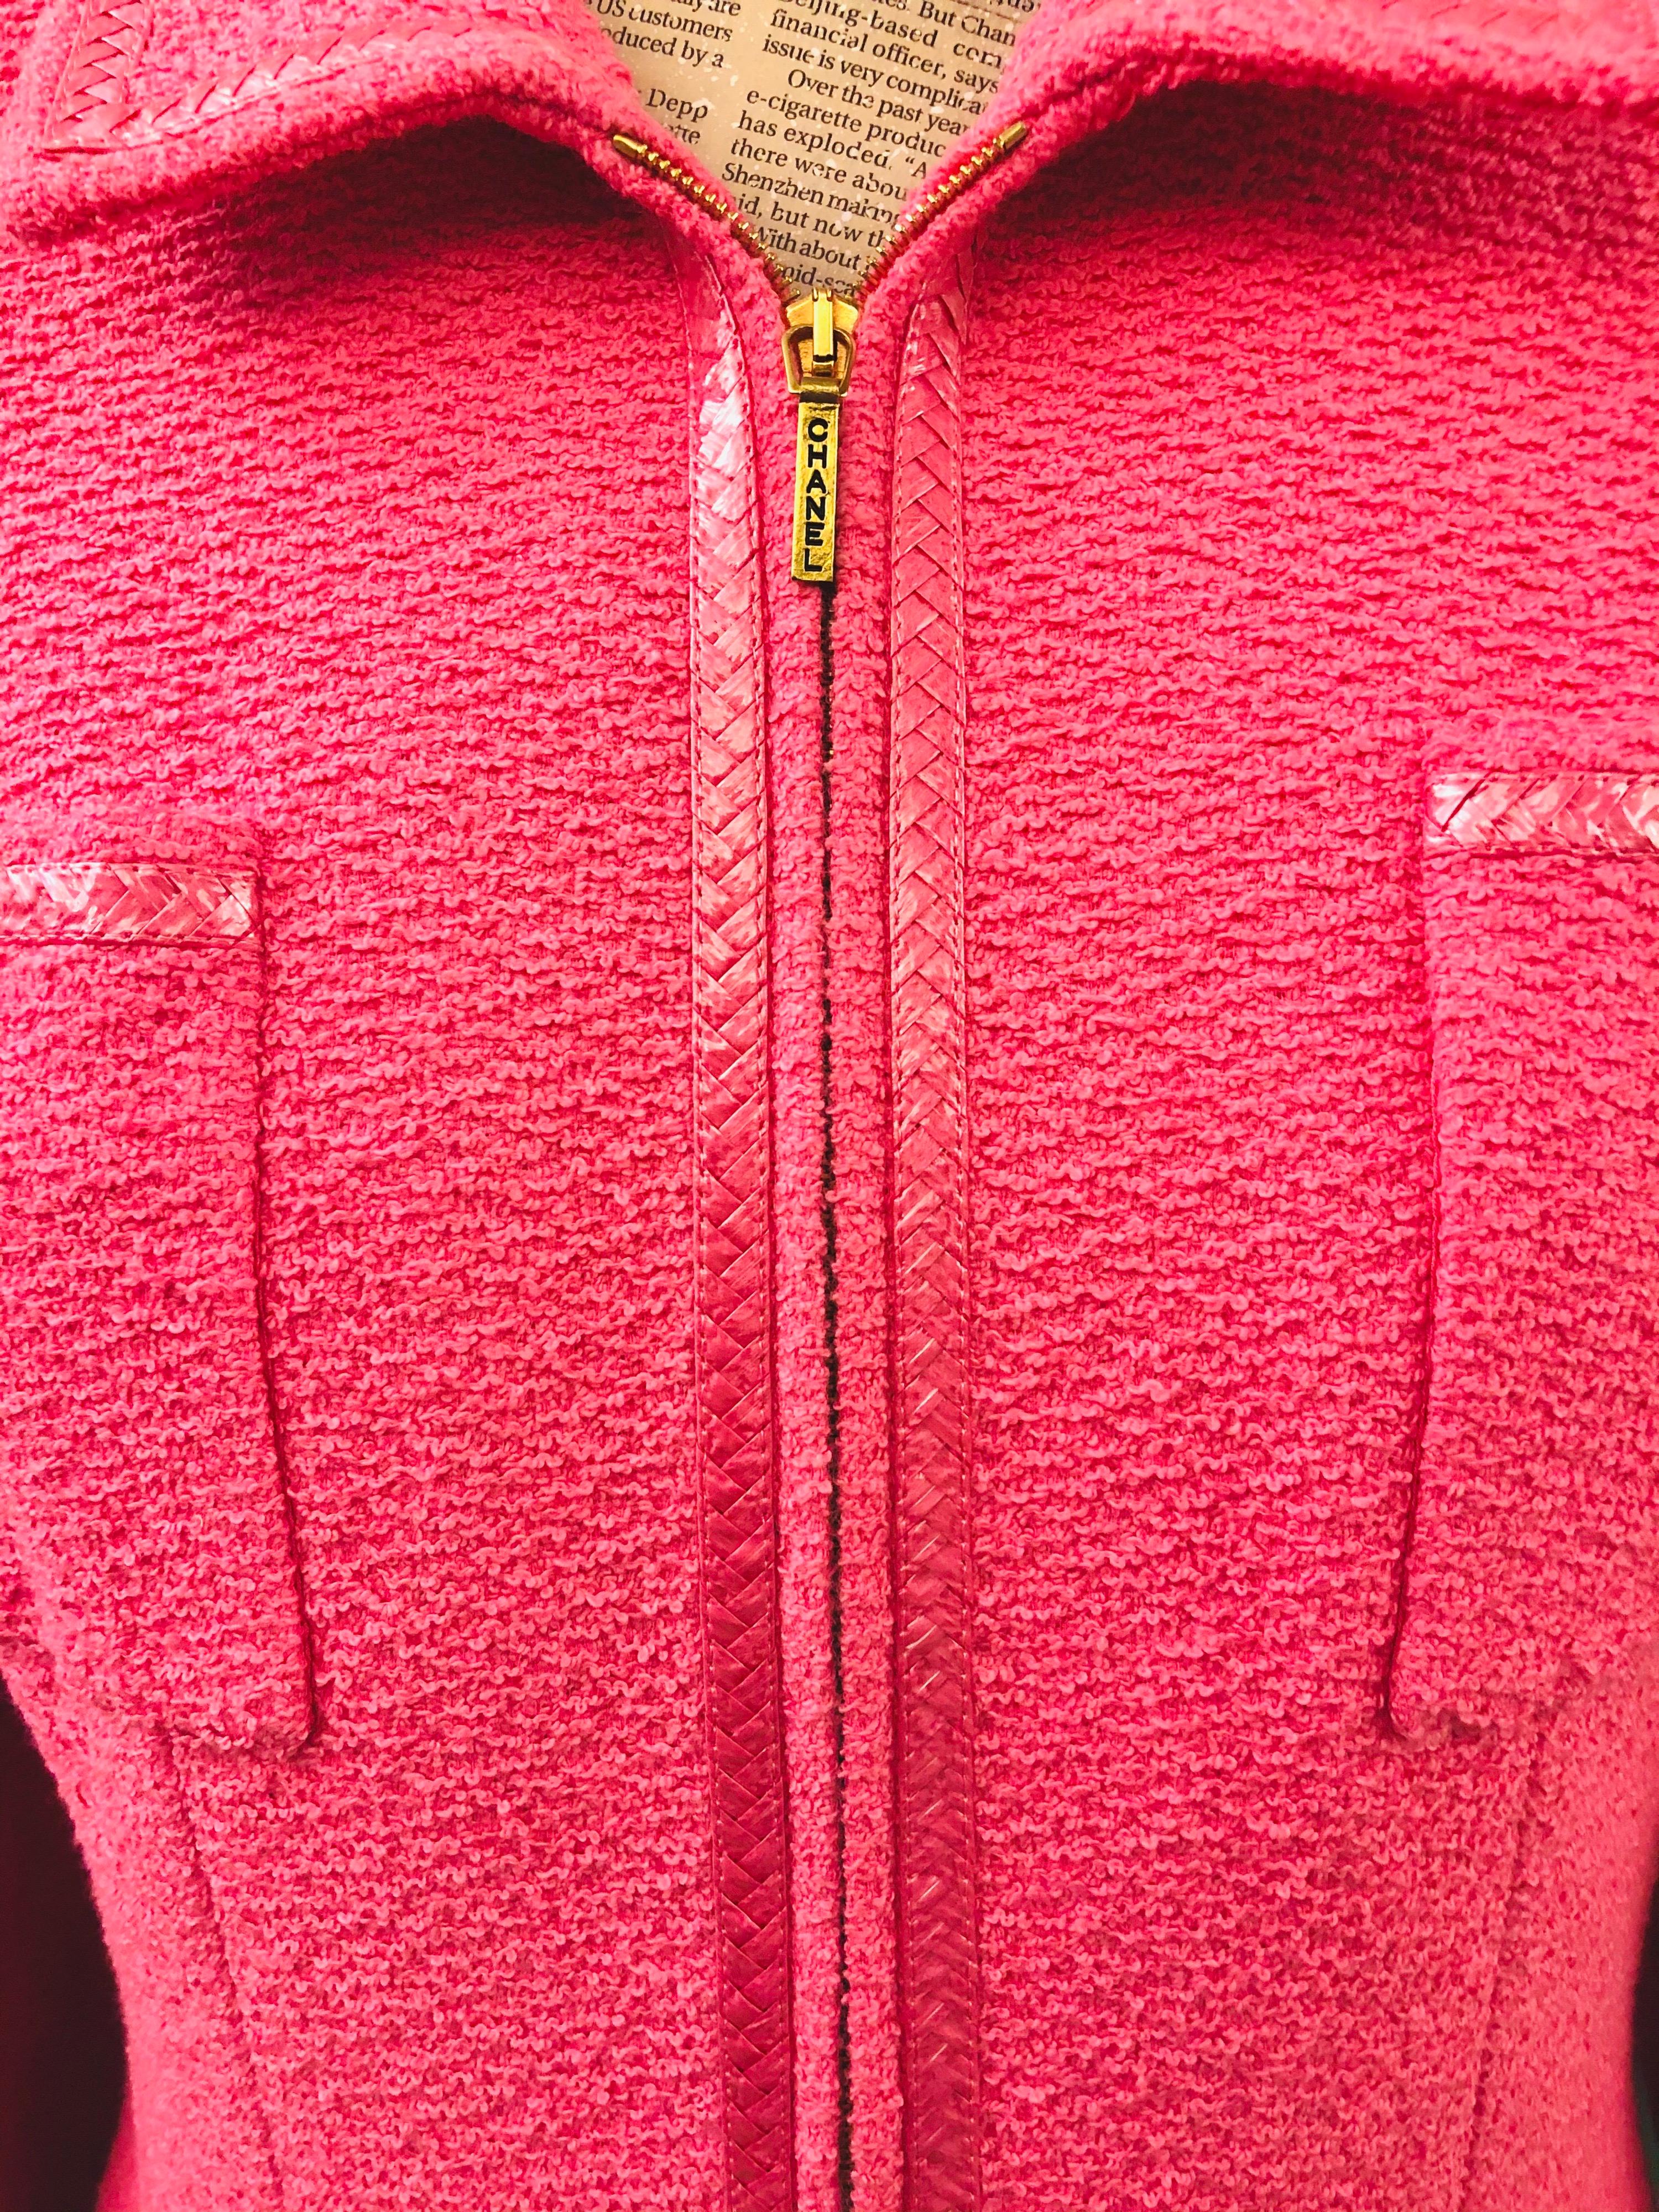 - Vintage Chanel pink tweed jacket from spring 1995 collection. 

- “Chanel’ gold hardware zip closure. 

- Four front pockets. 

- “CC’ gold hardware buttons. 

- Size 40 but fits like 38. (Altered). 

- Unworn with tag! 

- 61% Cotton, 24% Wool,